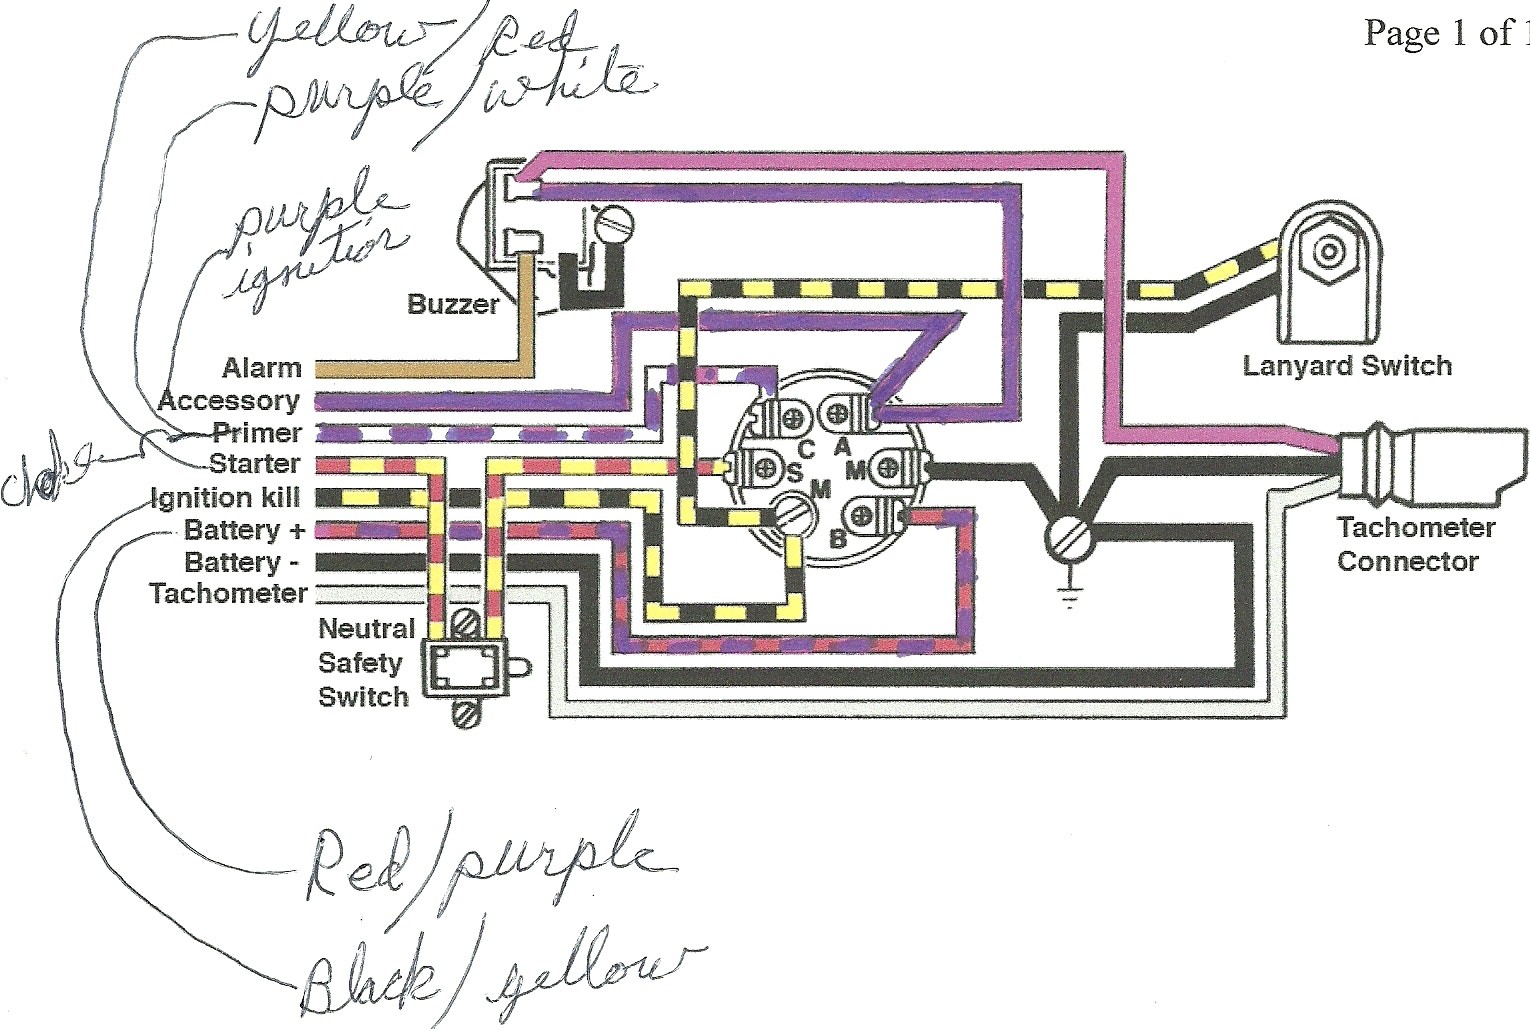 Full Size of Diagram wiring Diagram Auto Arcticchat Arctic Cat Forum Awesome Ignition Picture